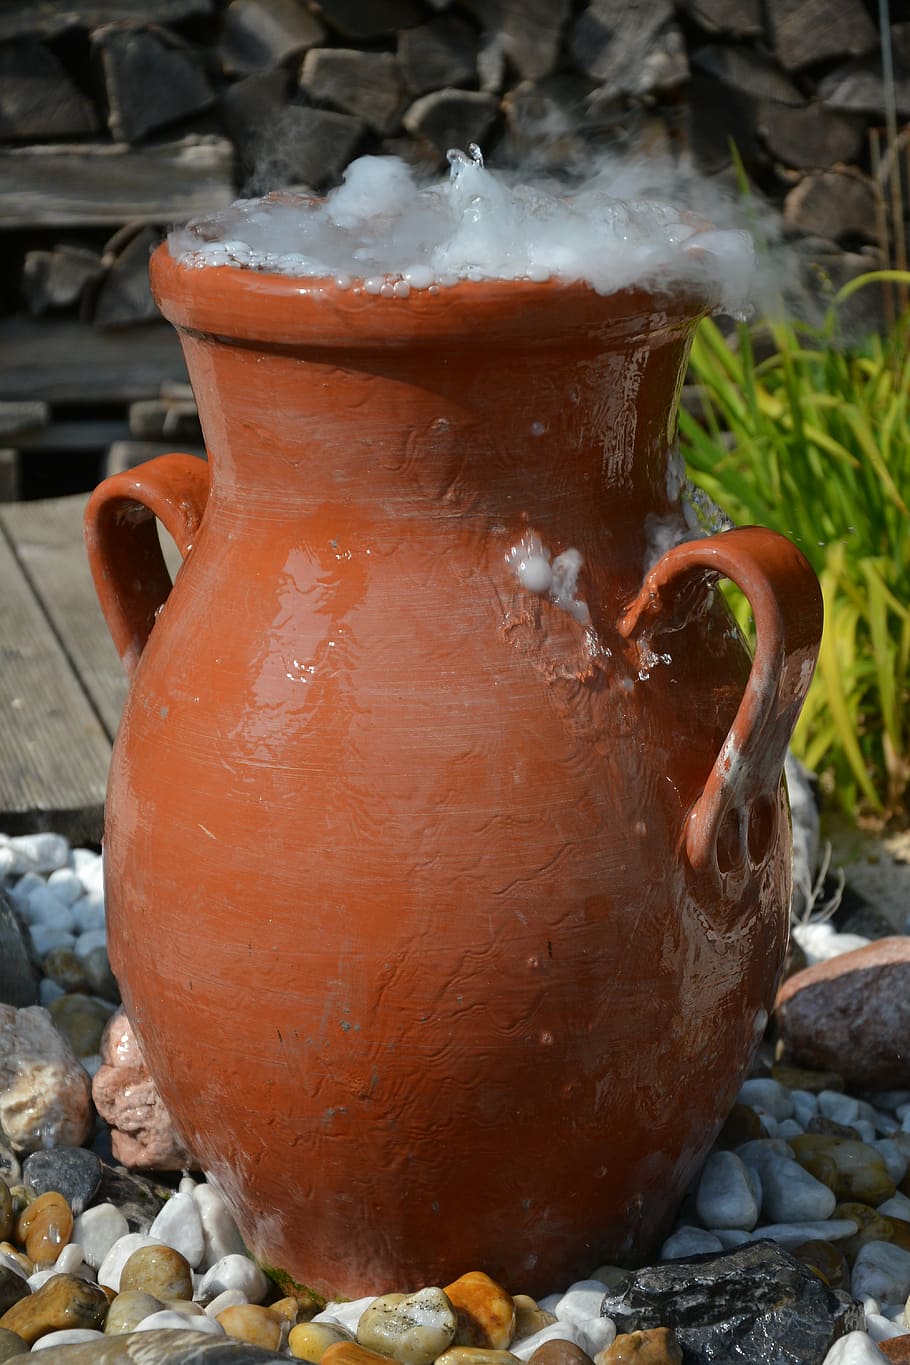 amphora, krug, dry ice, jug, pottery, close-up, orange color, day, cold temperature, focus on foreground